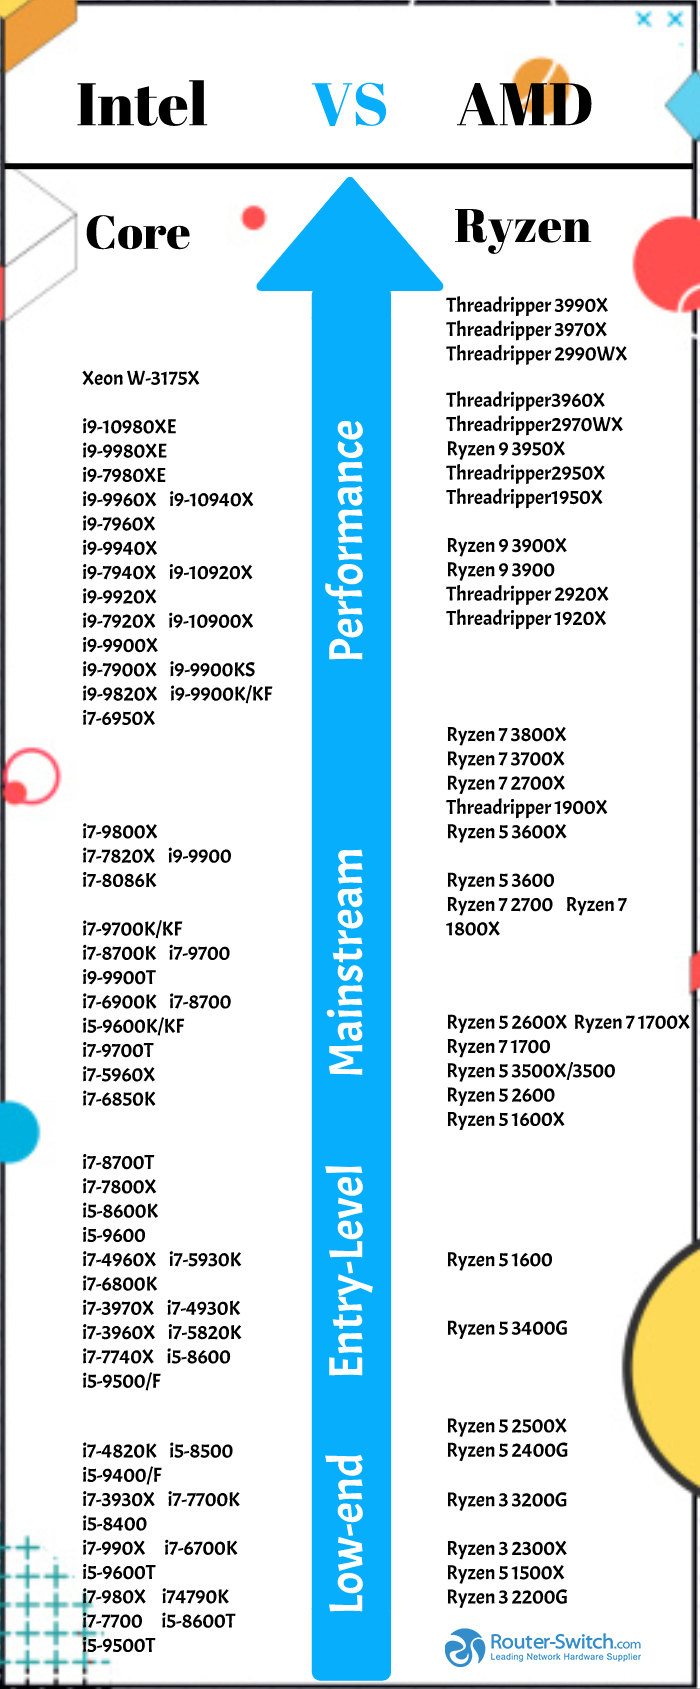 intel-vs-amd-which-is-better-processor-learn-intel-vs-amd-comparison-chart-router-switch-blog